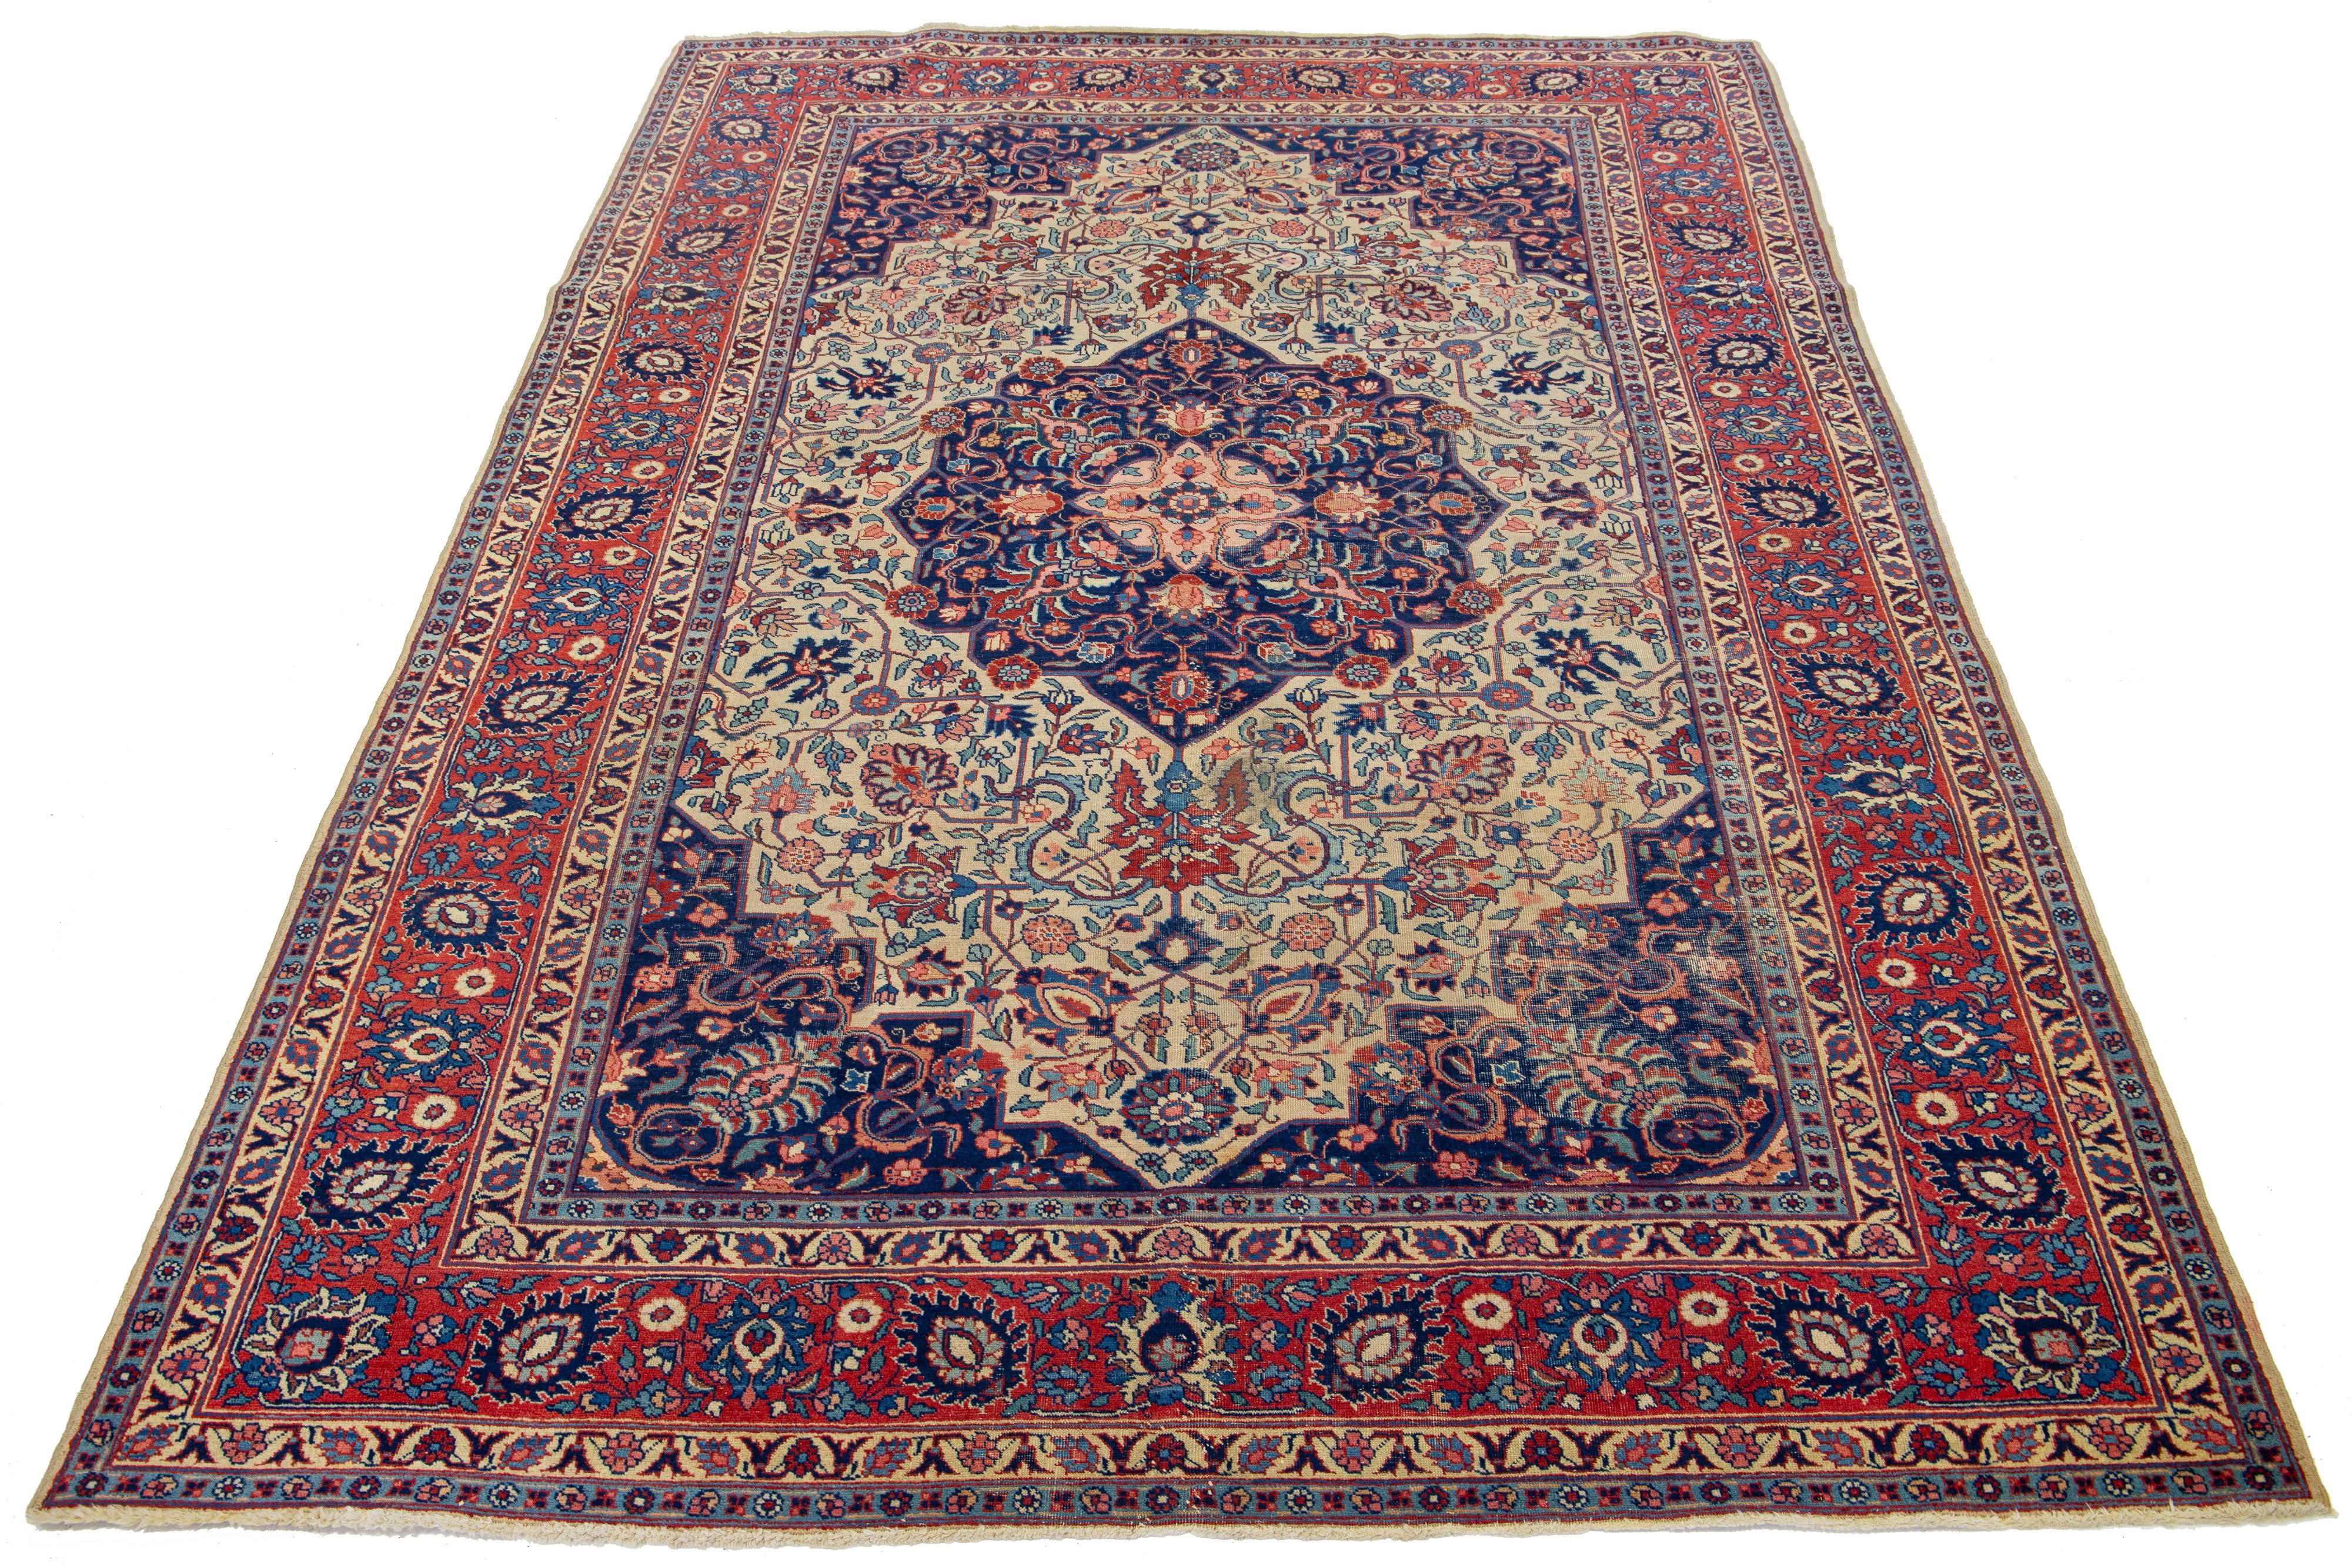 This beautifully handcrafted Persian Tabriz wool rug displays a classic floral pattern. The contrast created by the blue background accentuates the medallion floral design, which features shades of beige-tan, pink, and red.

This rug measures  6'6